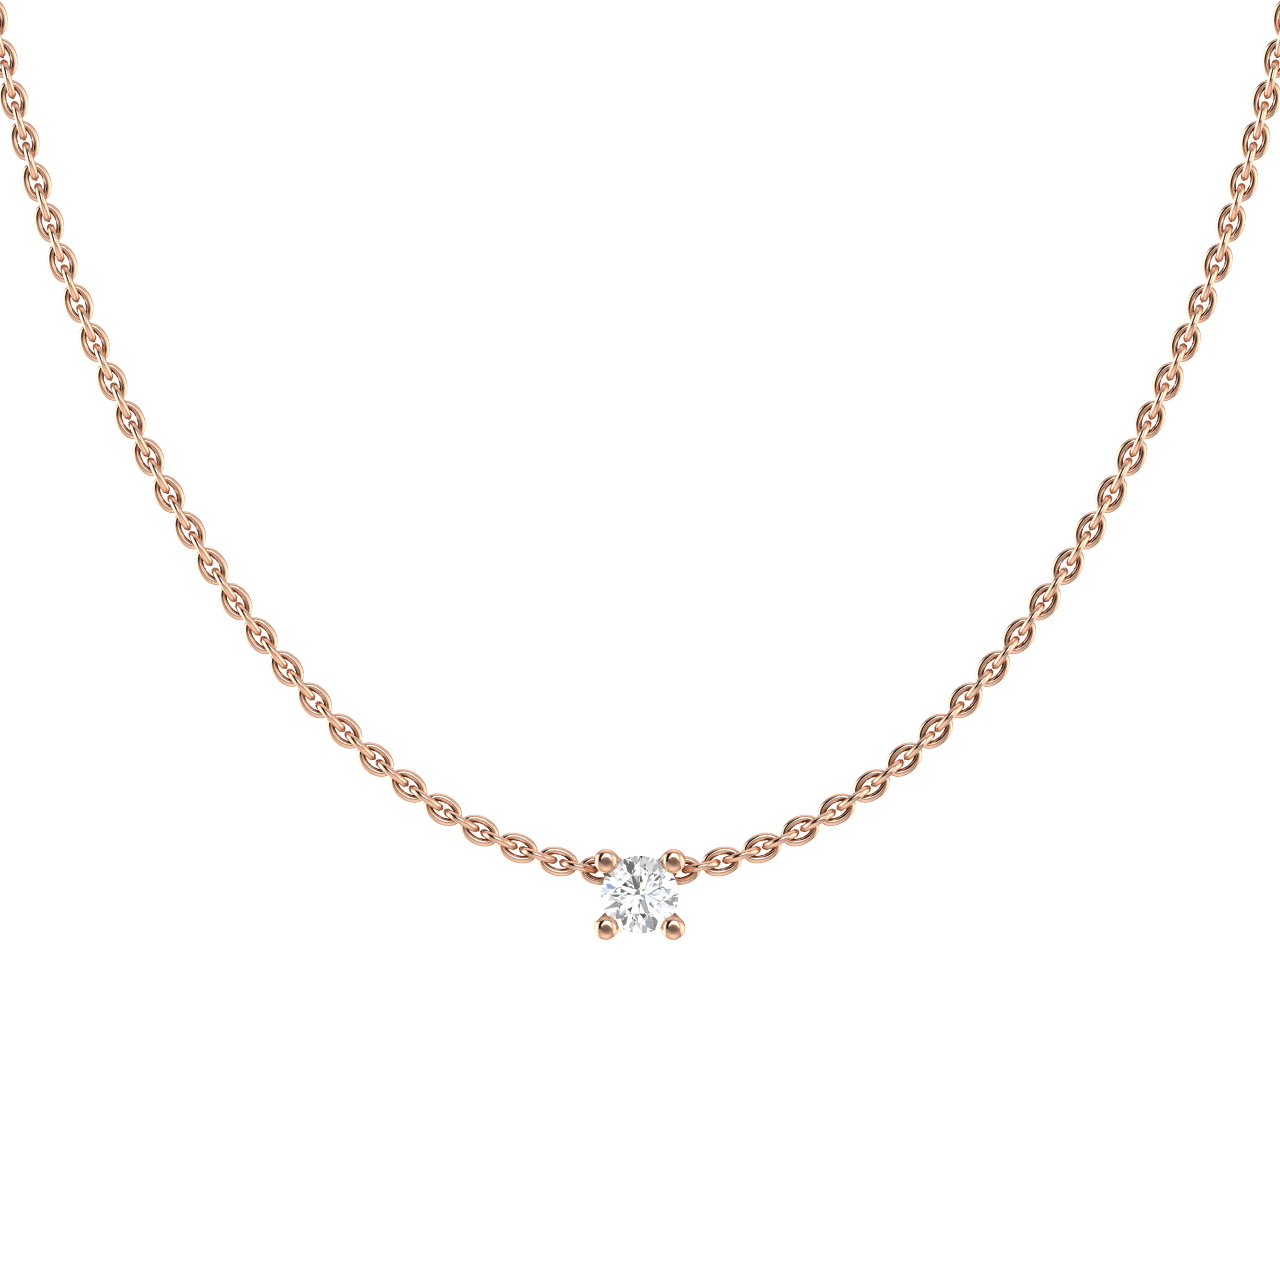 18K Gold Lab-Grown Diamond Solitaire Necklace | 18K rose gold / 0.1 ct / Chain length 450 mm  | Jewelry | The Future Rocks